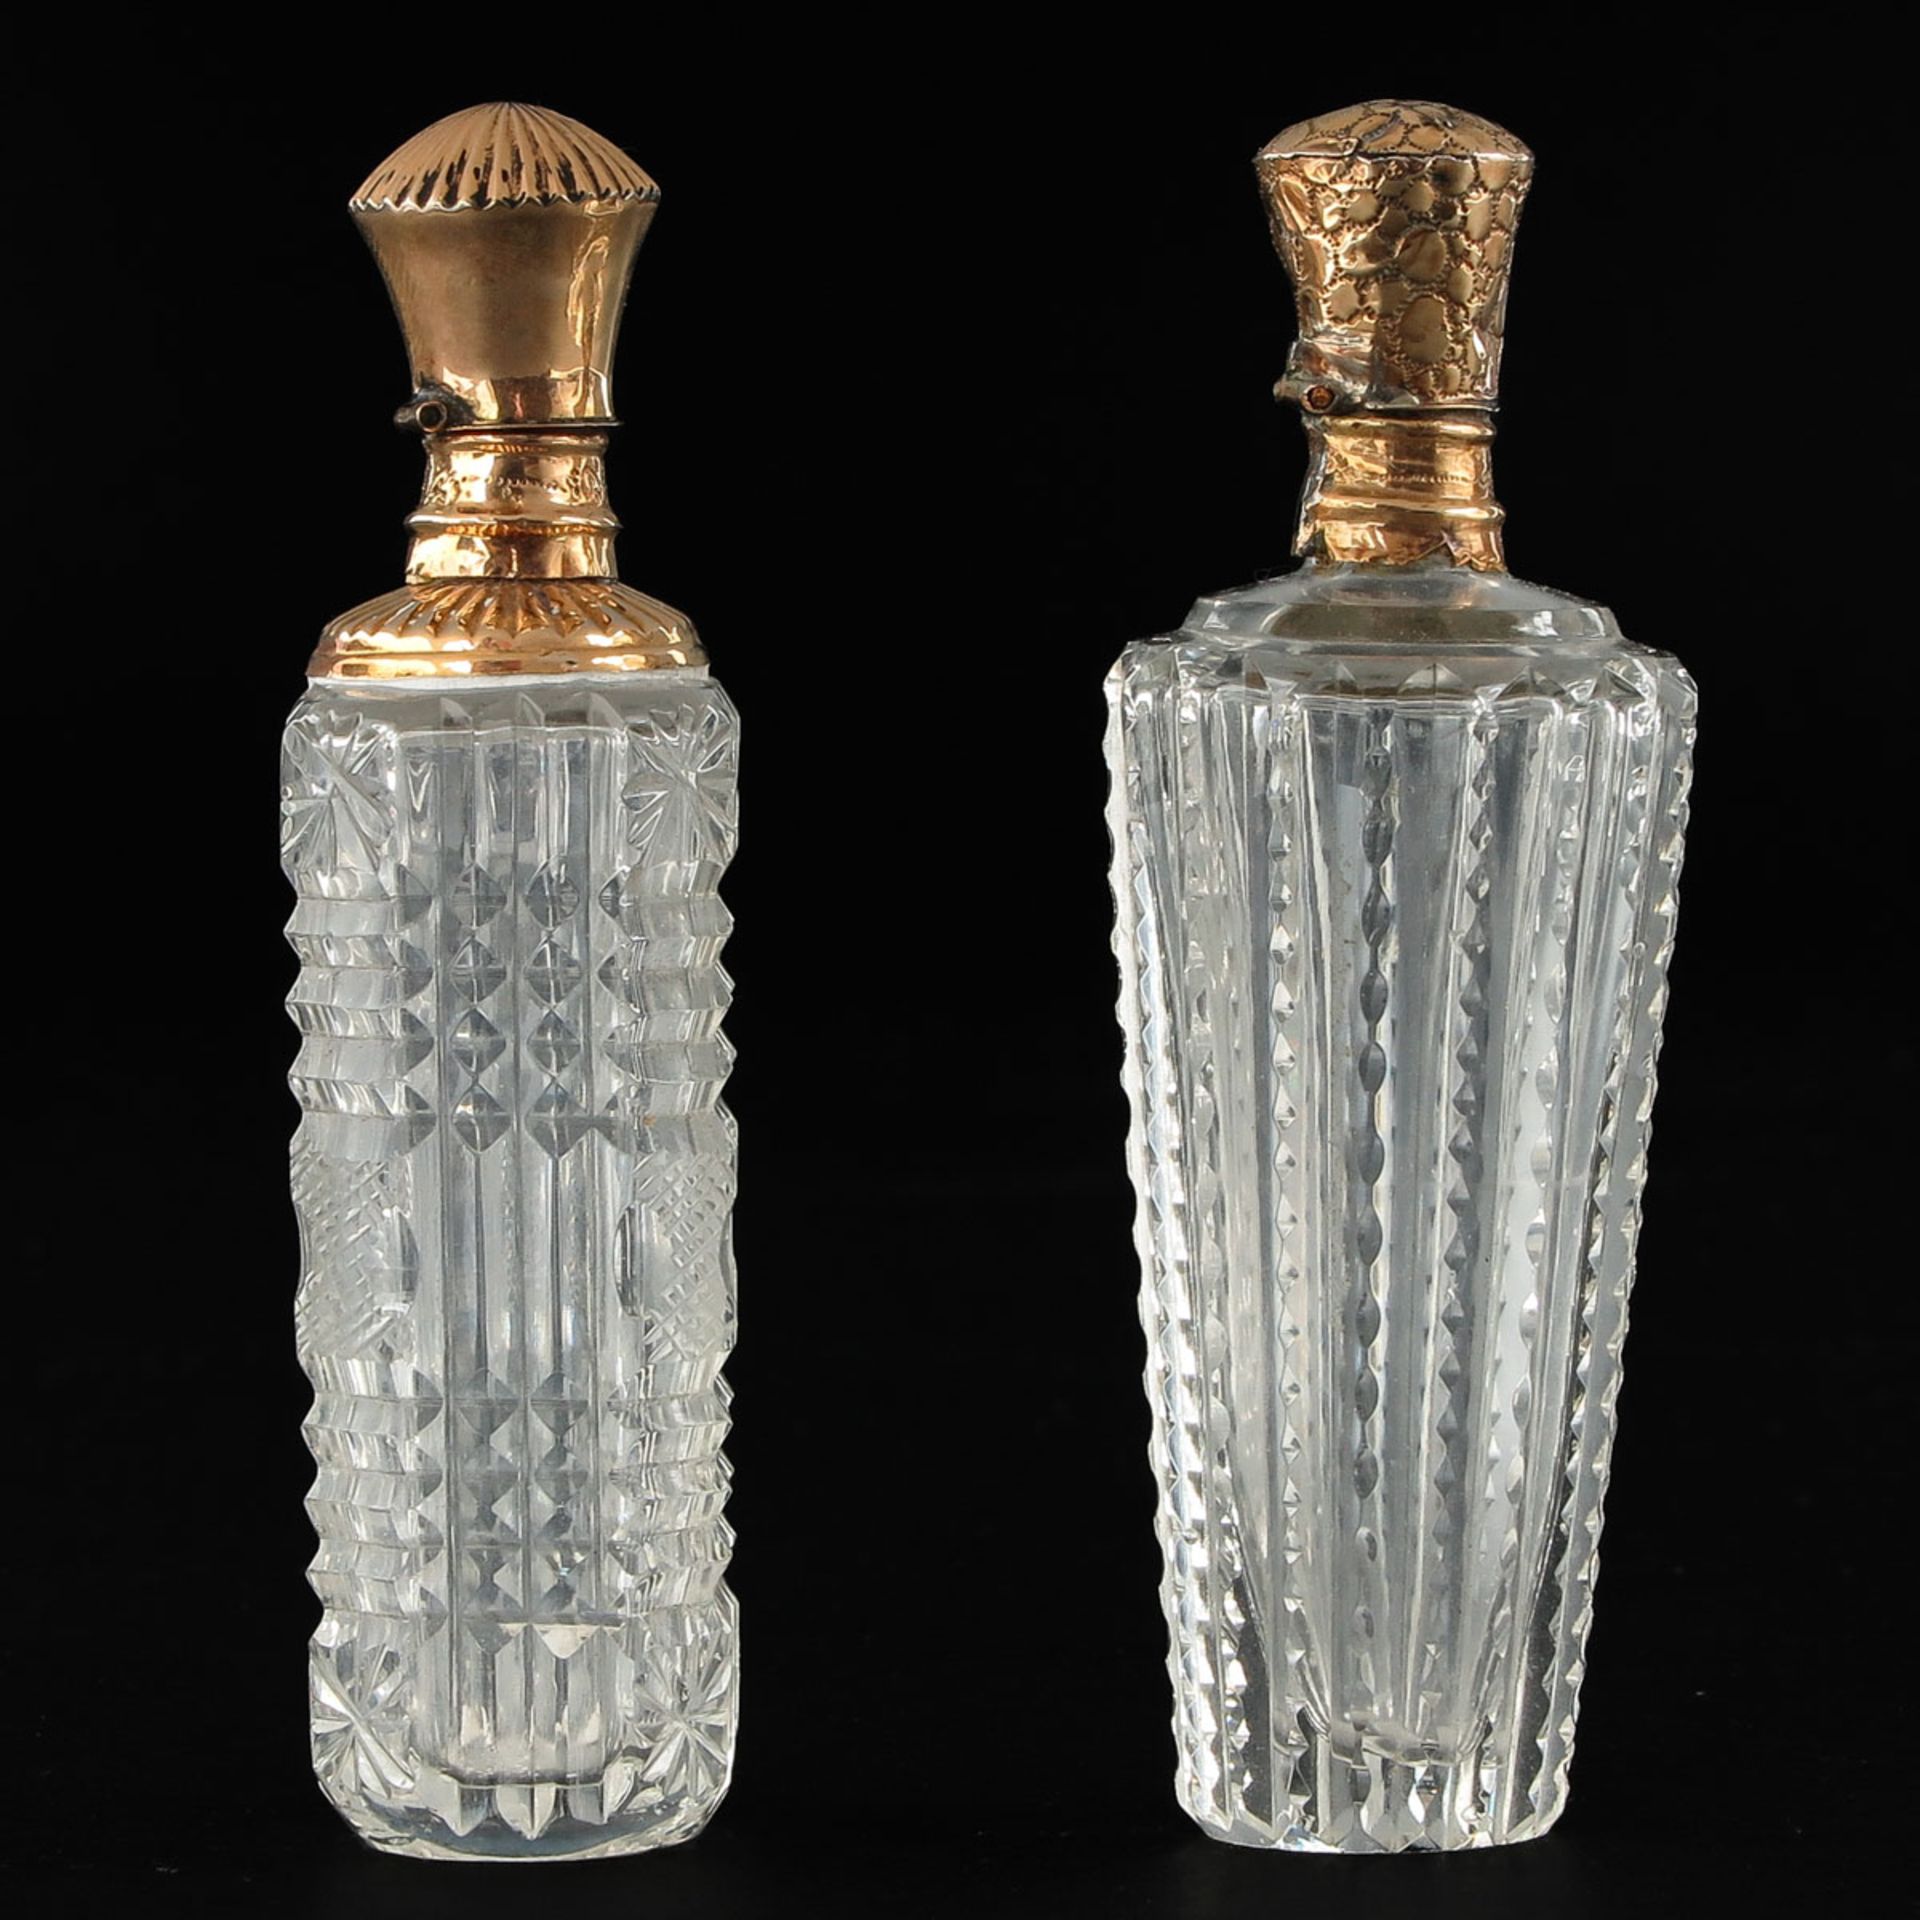 A Lot of 2 Perfume Bottles - Image 4 of 9